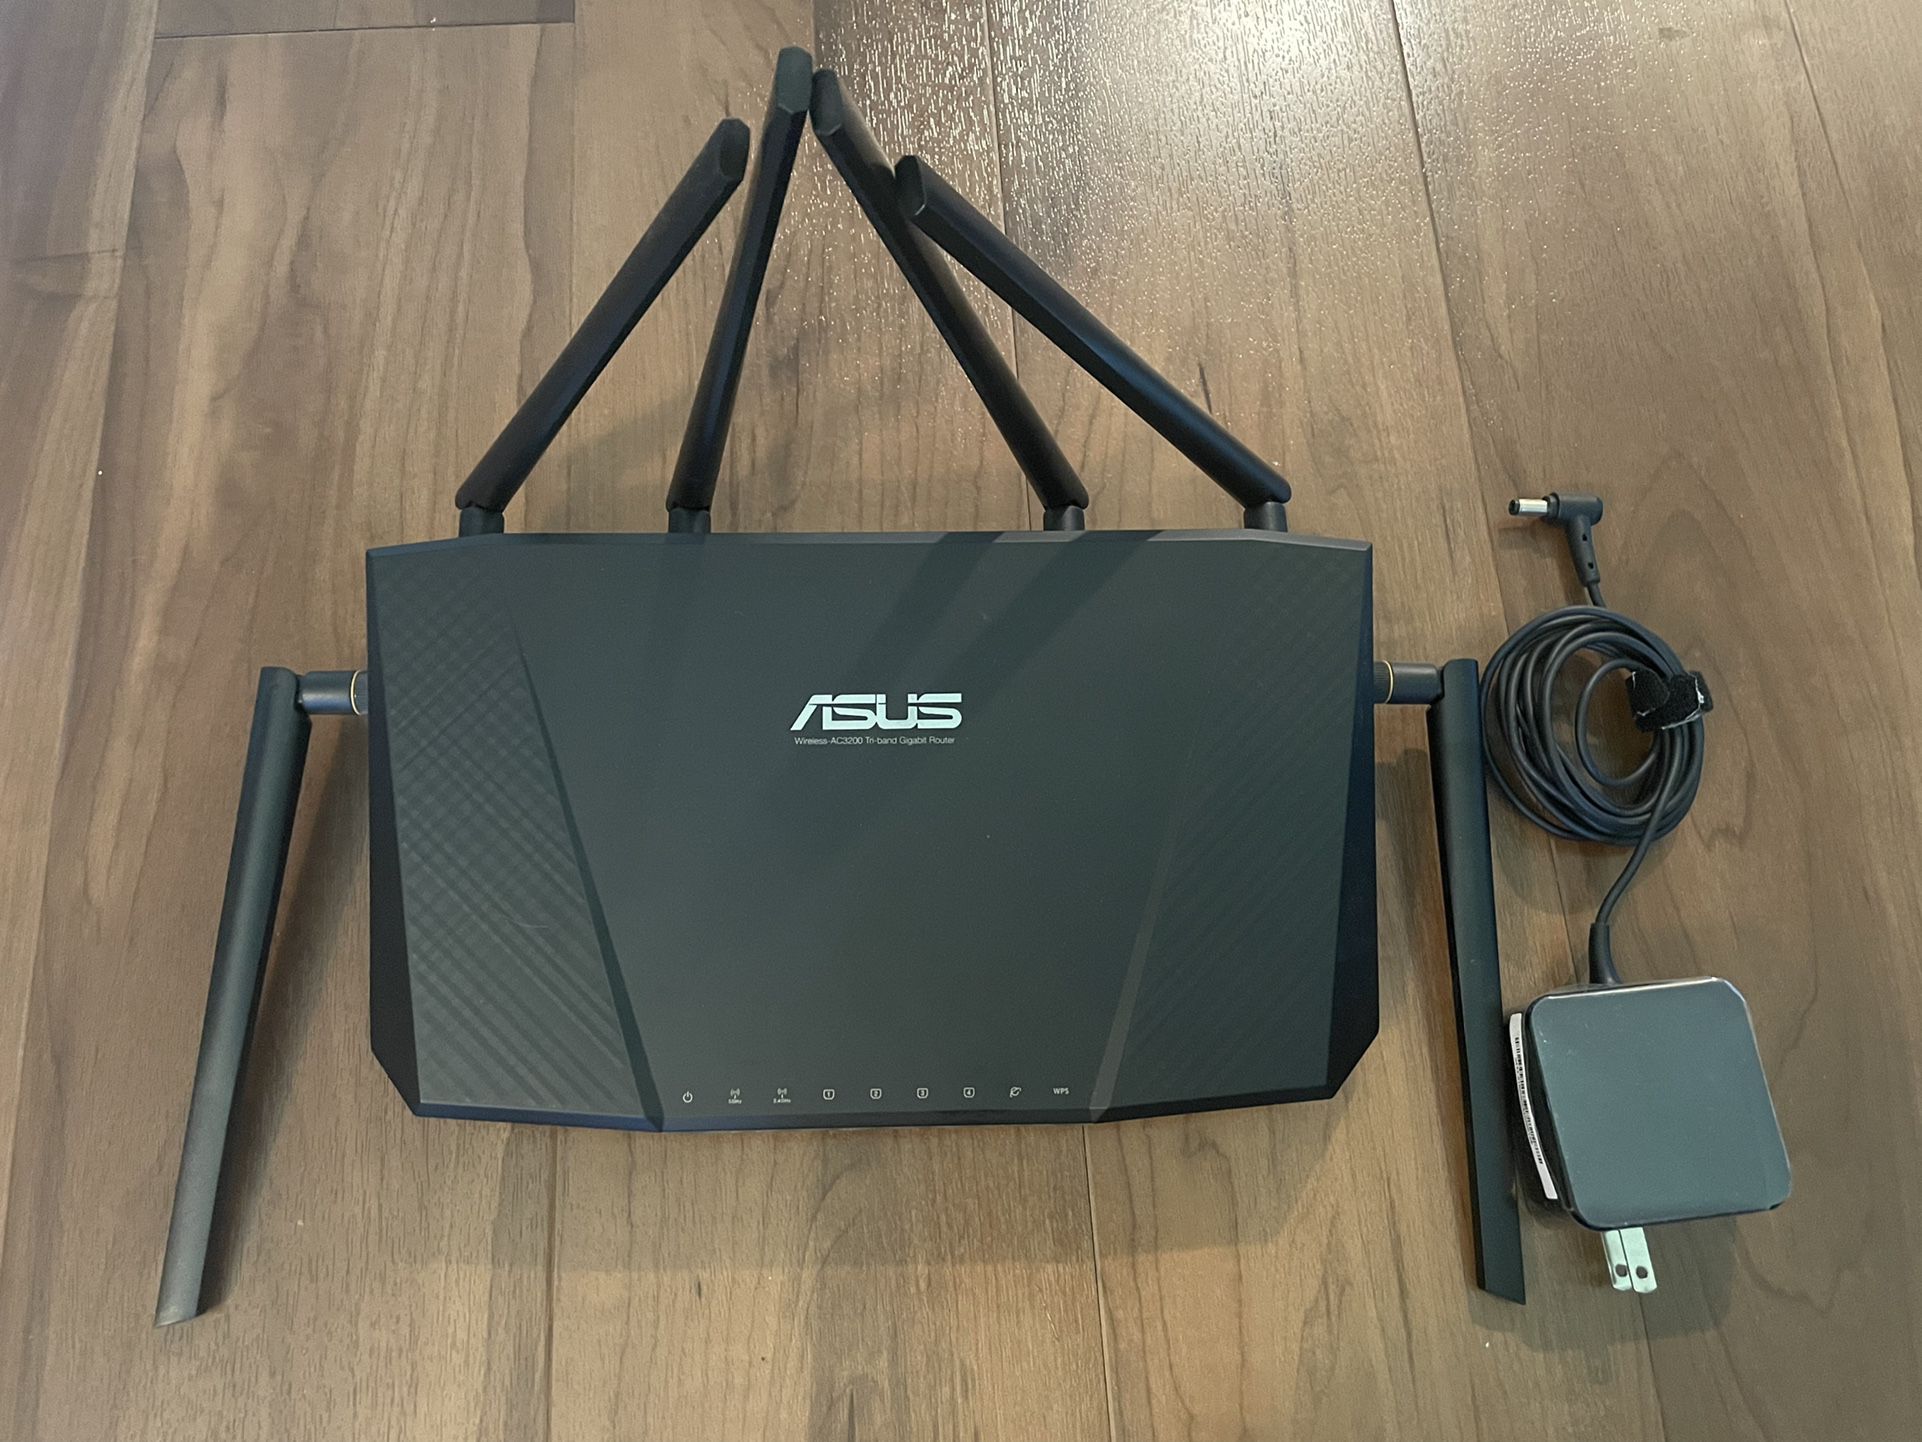 ASUS Wireless AC3200 Tri-band Gigabit Router 